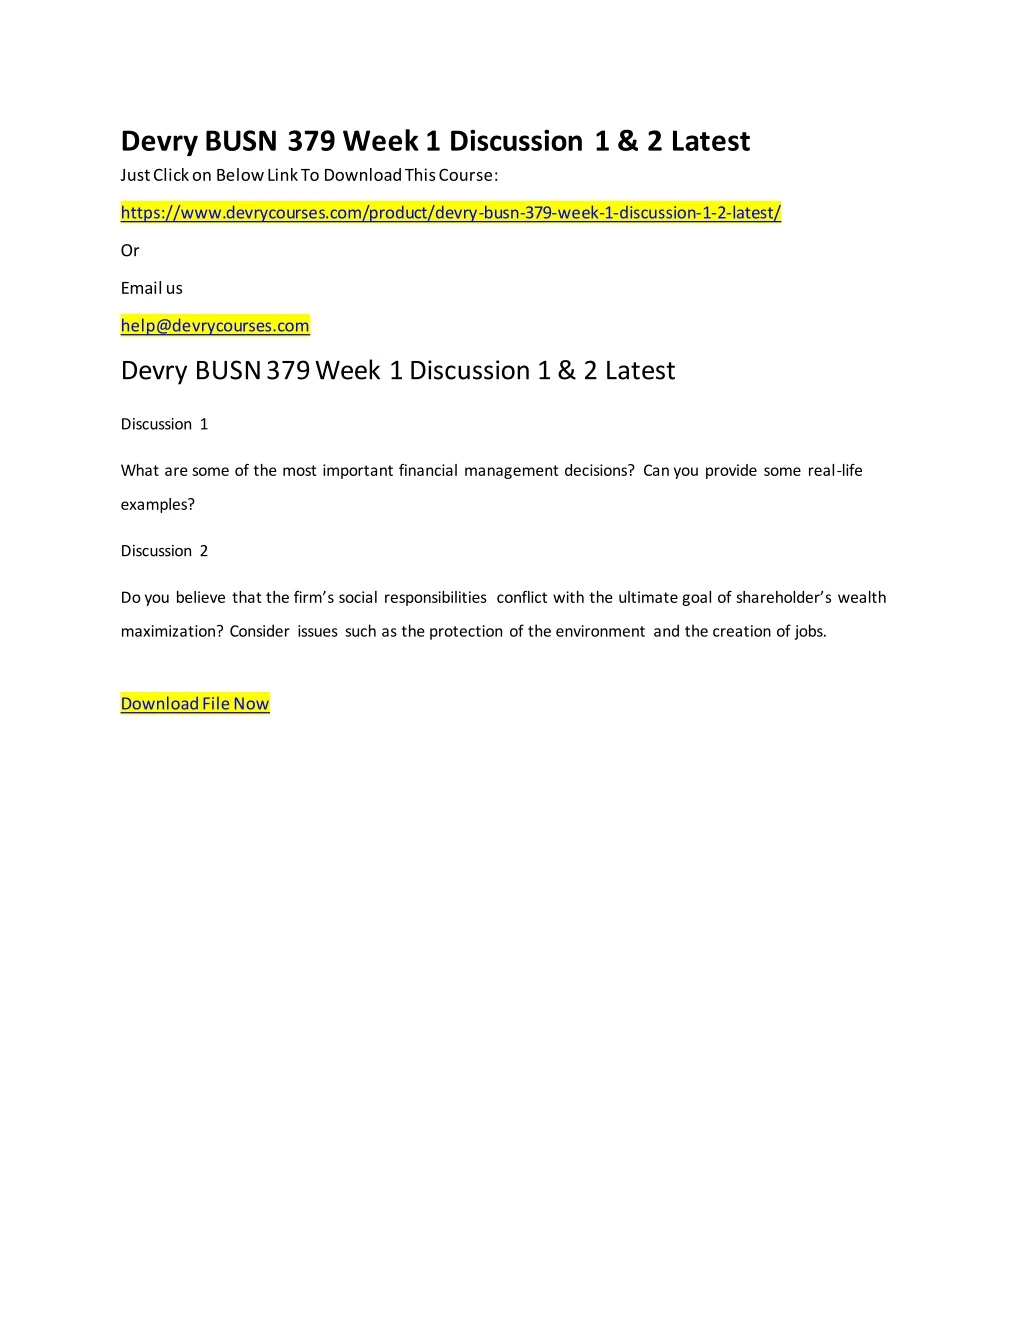 devry busn 379 week 1 discussion 1 2 latest just